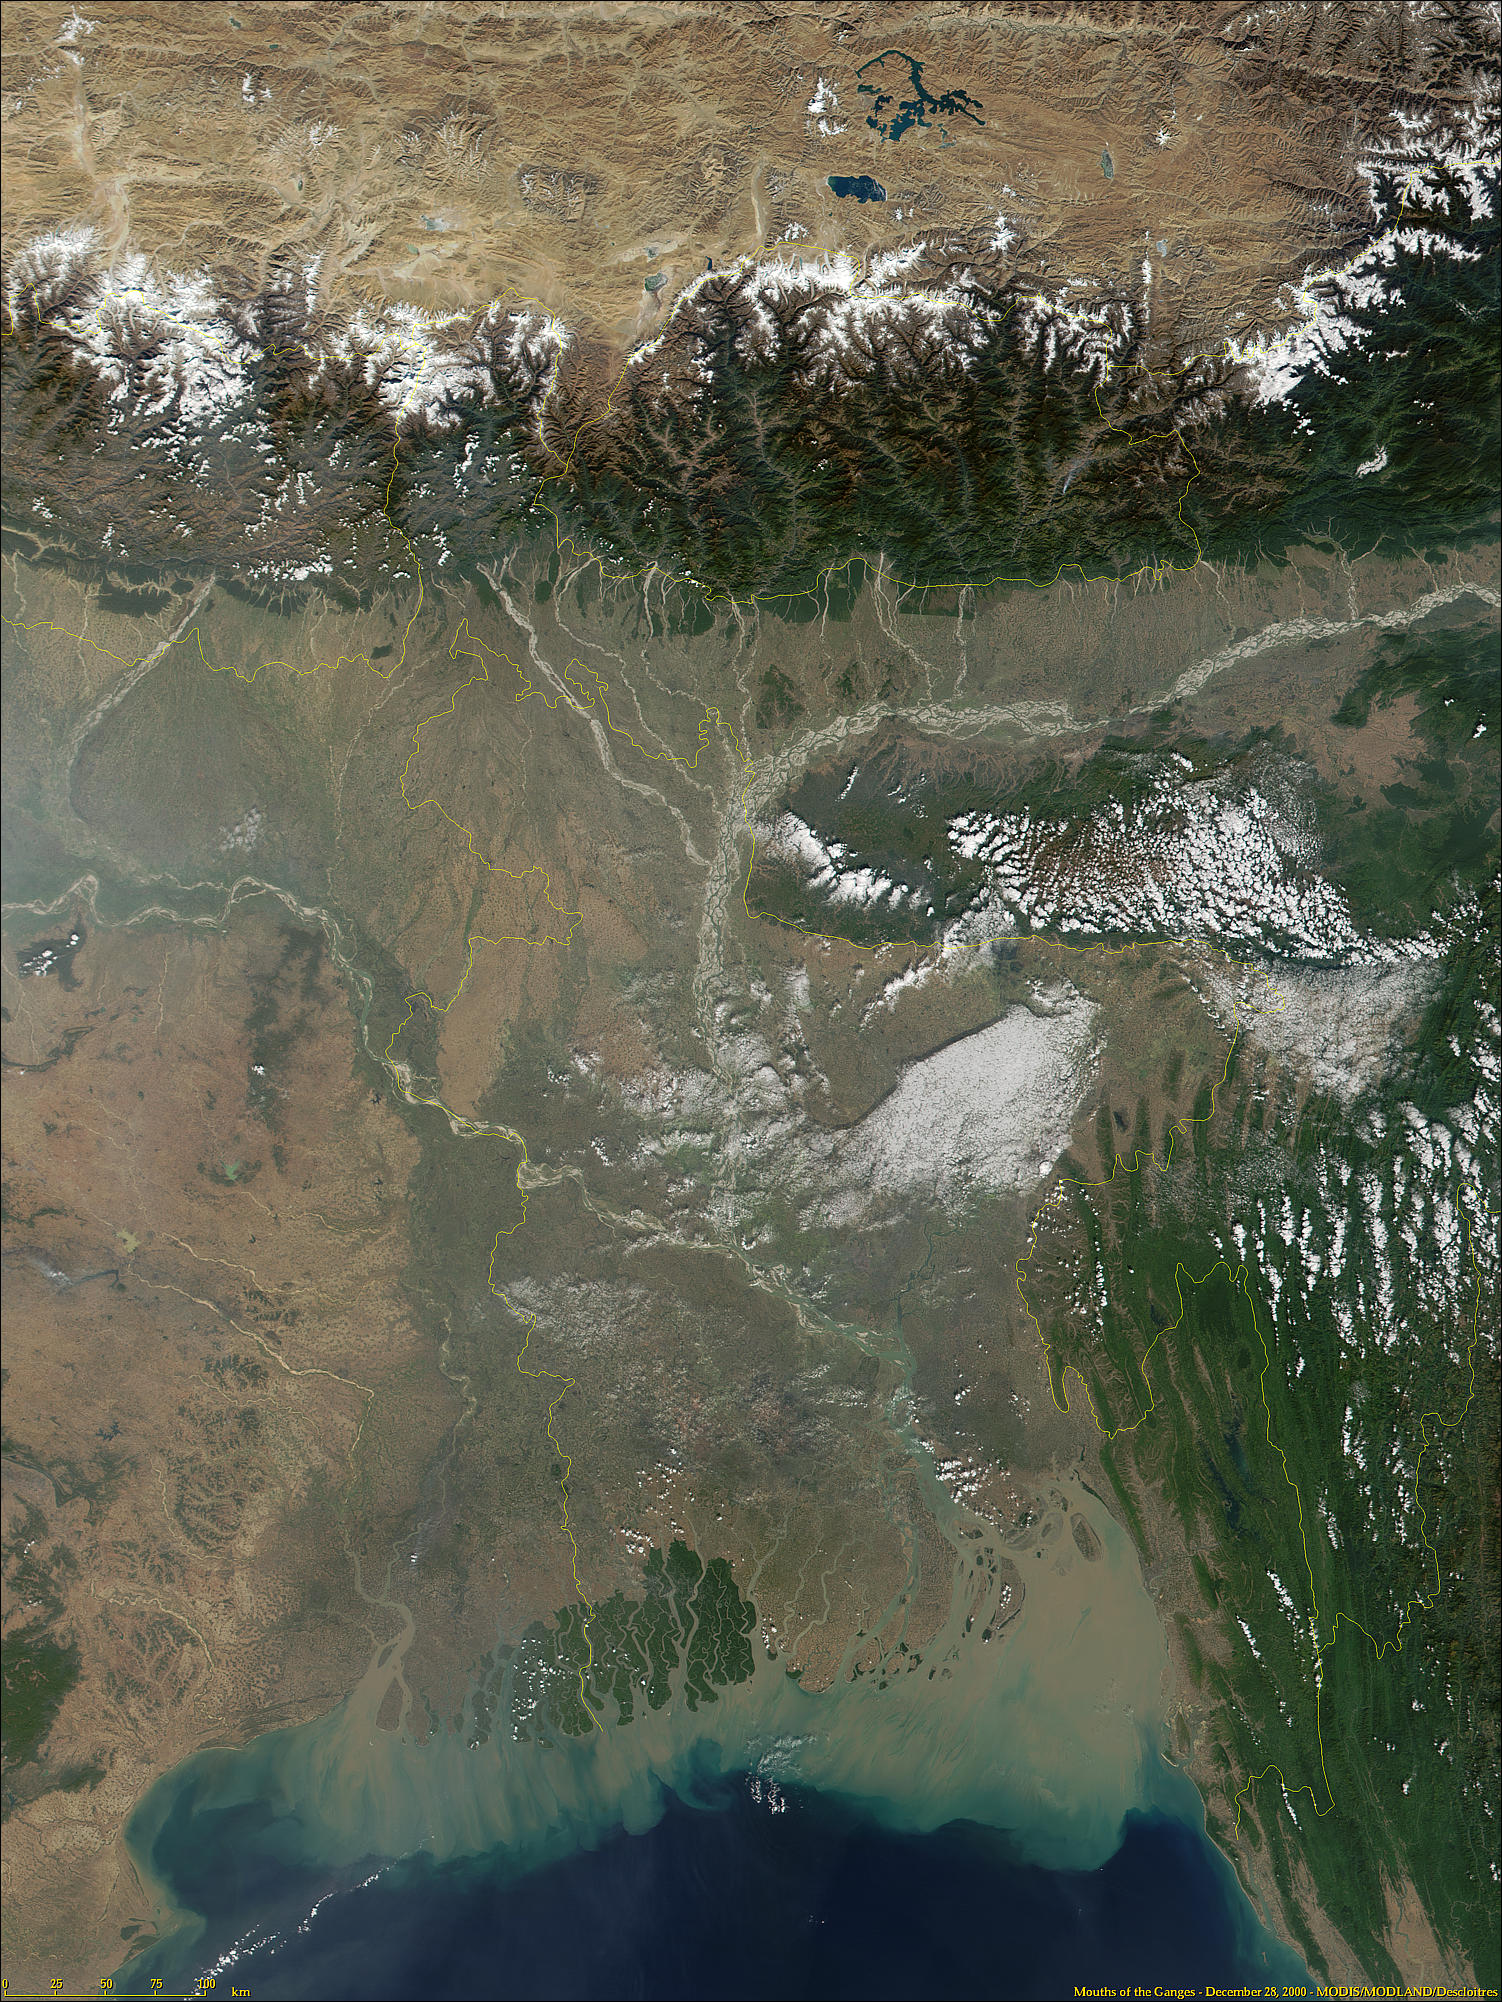 Ganges River Delta - related image preview